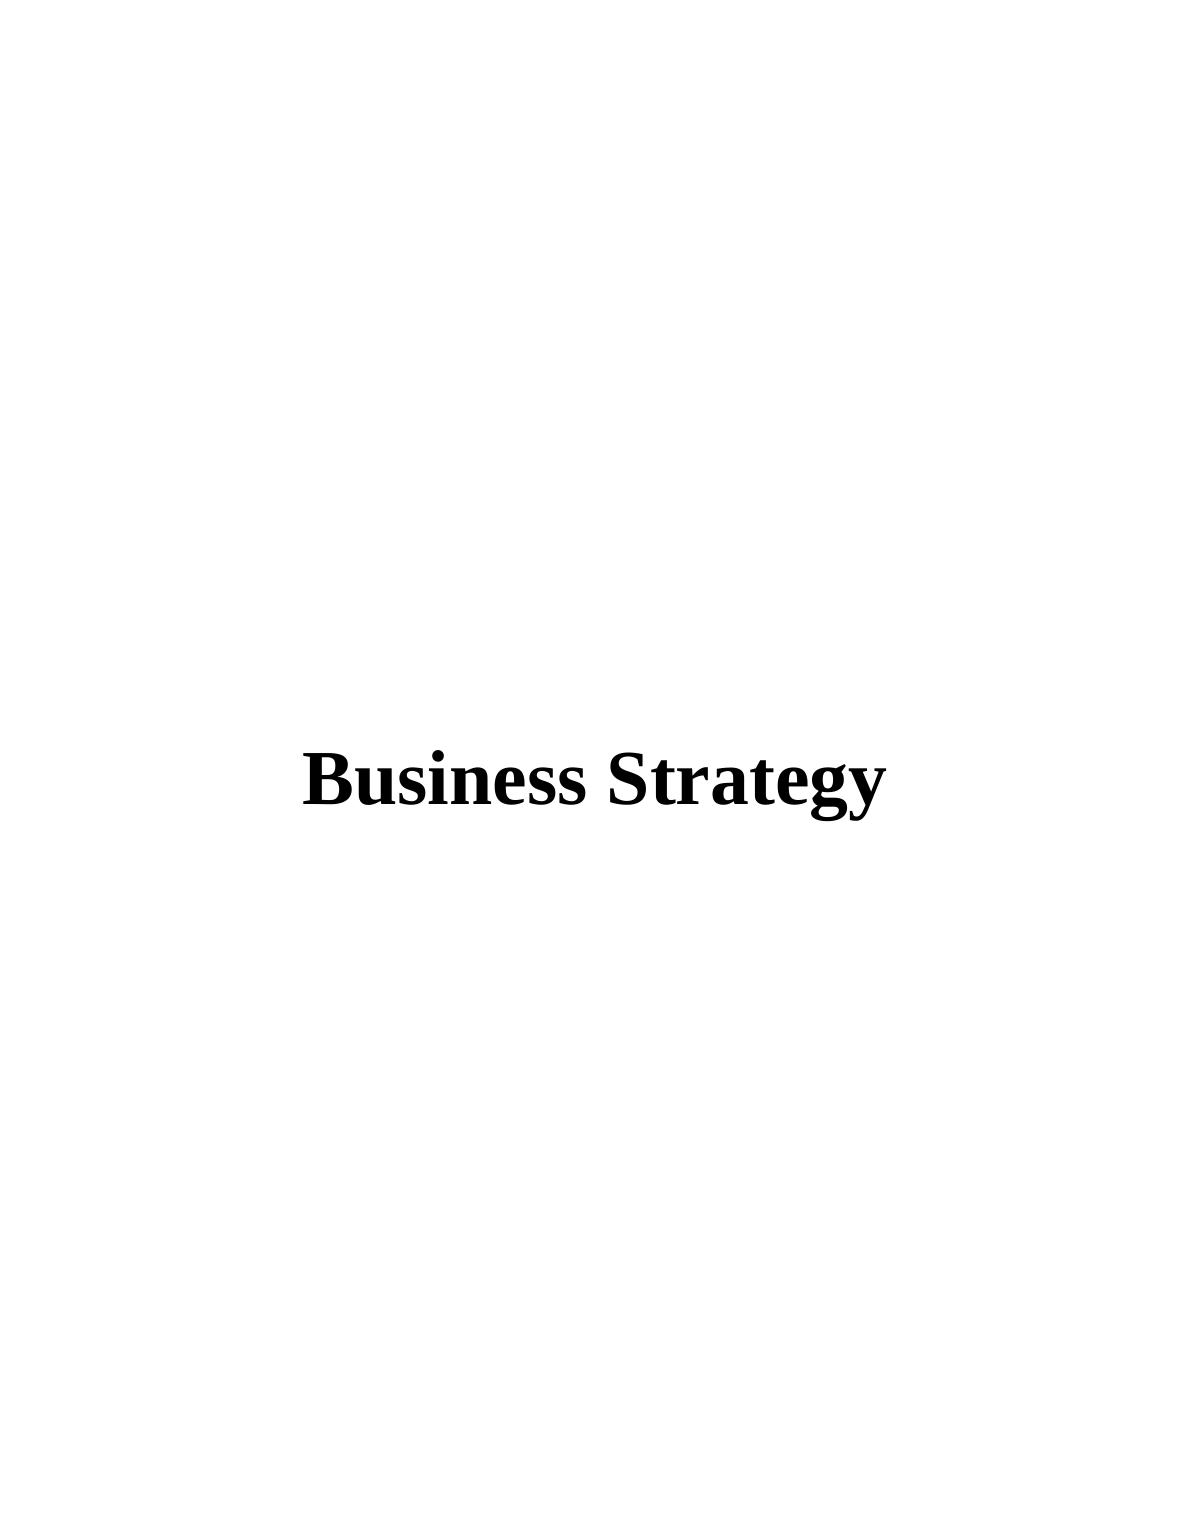 Business Strategy of Volkswagen Group_1